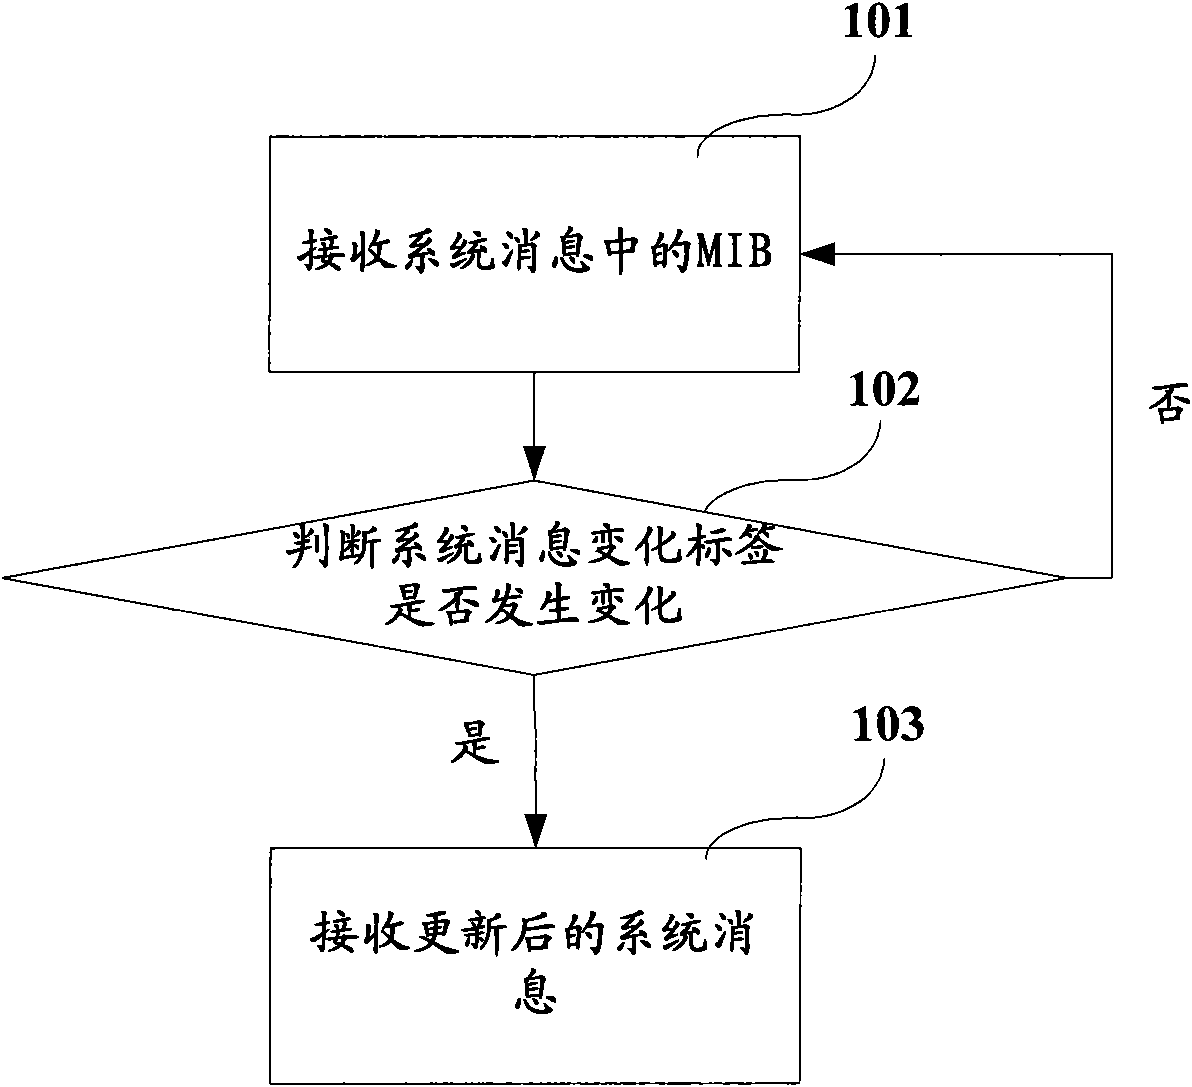 Method, device and system for acquiring system messages